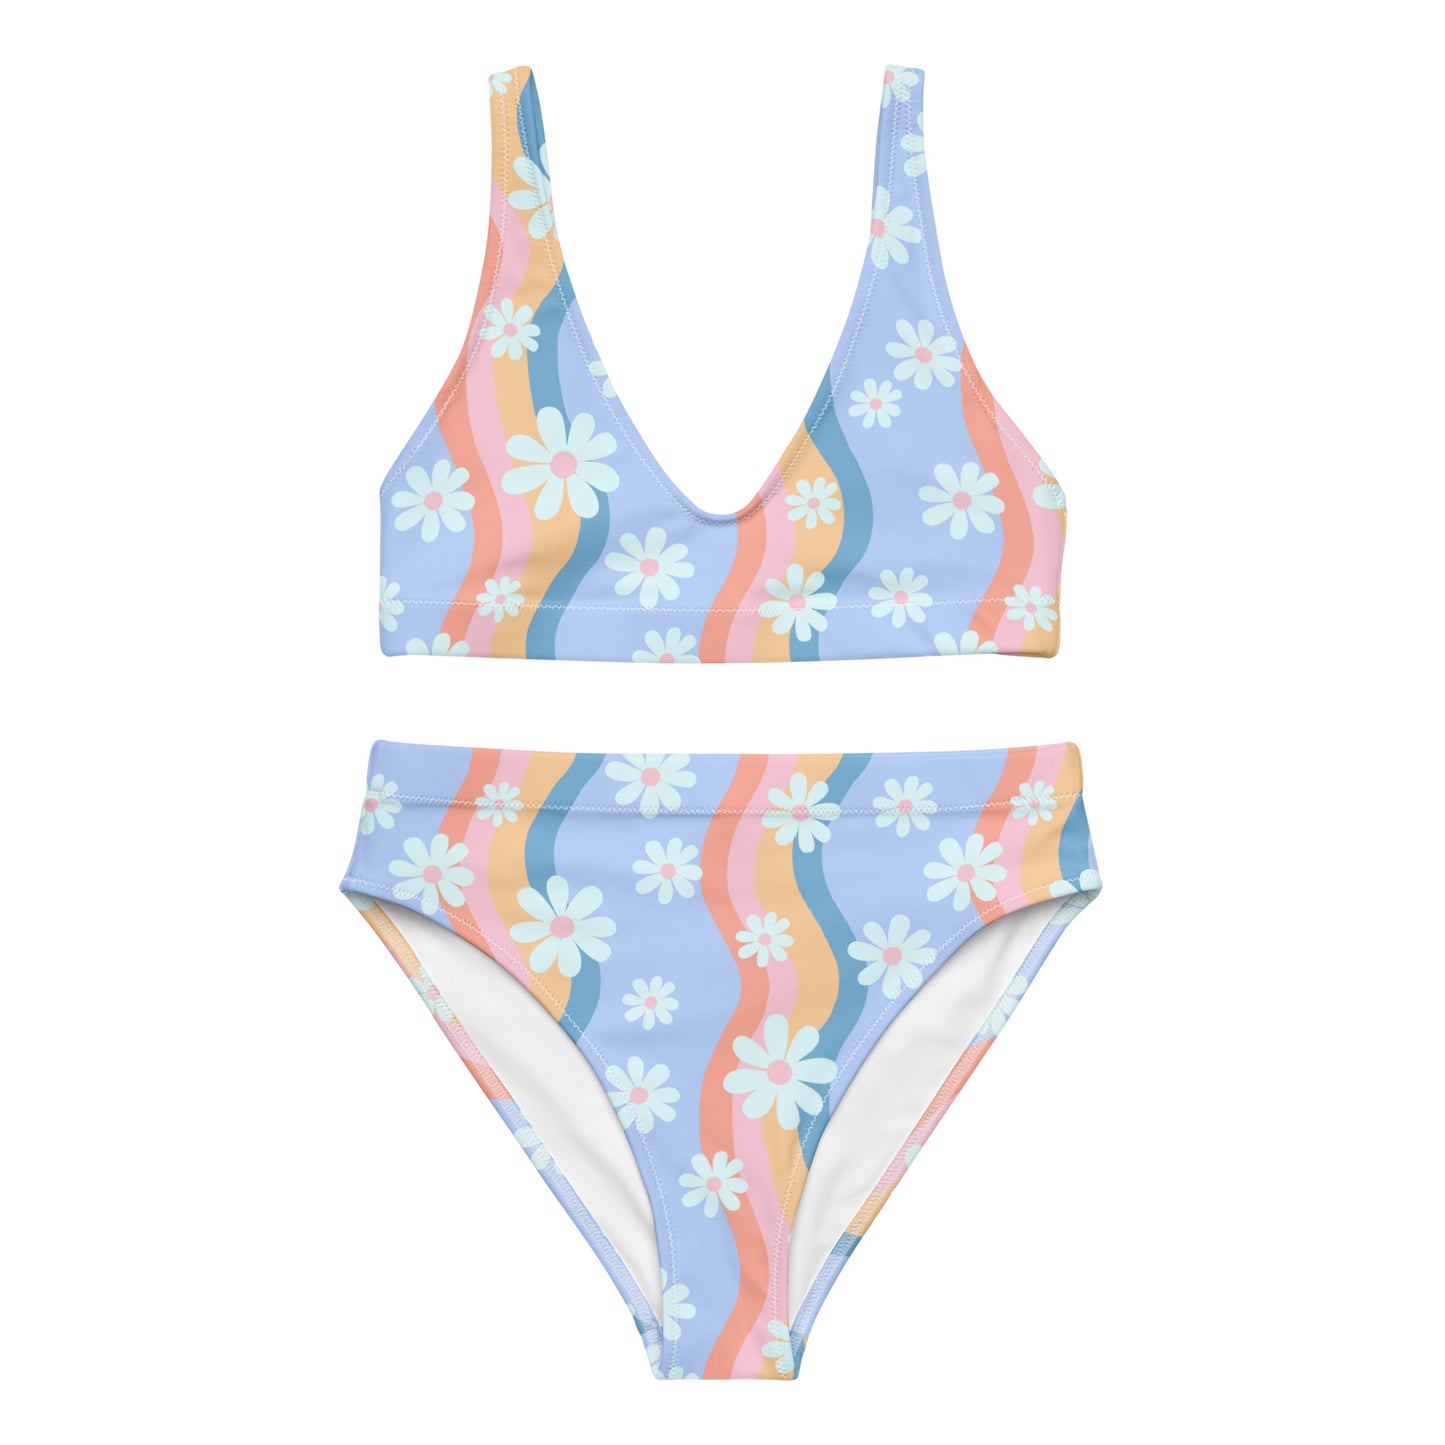 Pastel Groovy floral Rave outfit SET